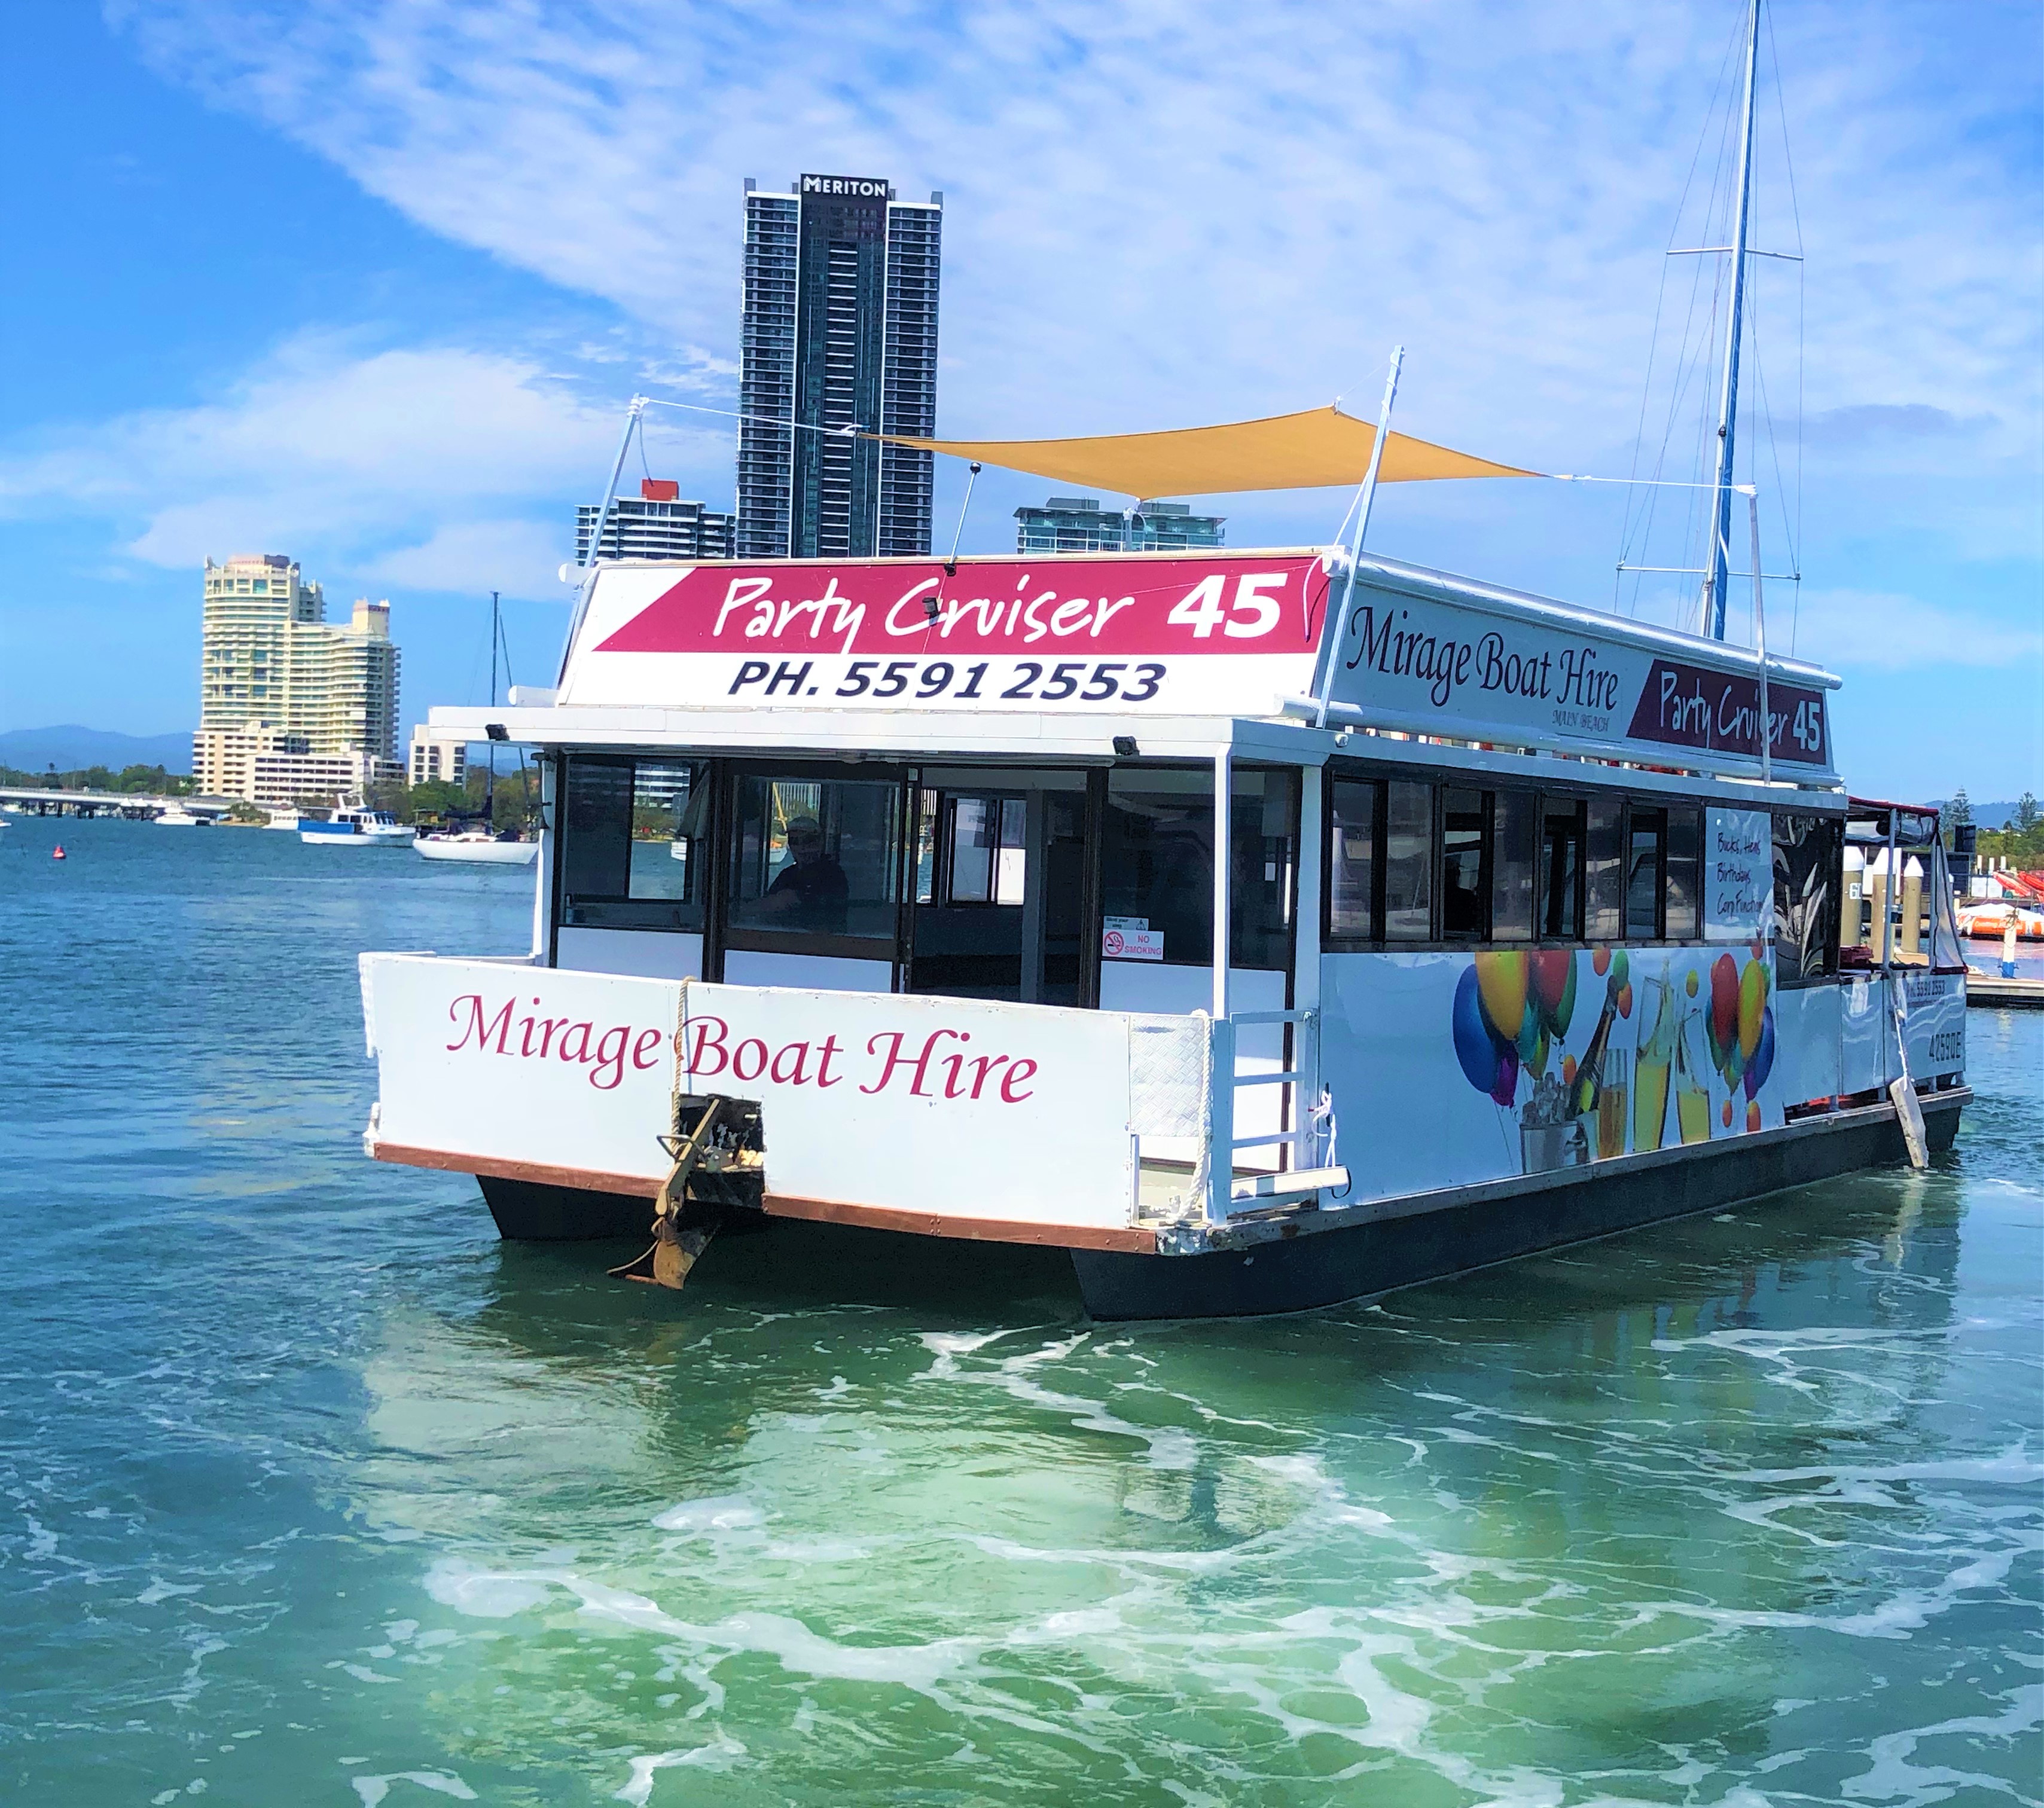 Mirage Boat Hire - Attractions Melbourne 1